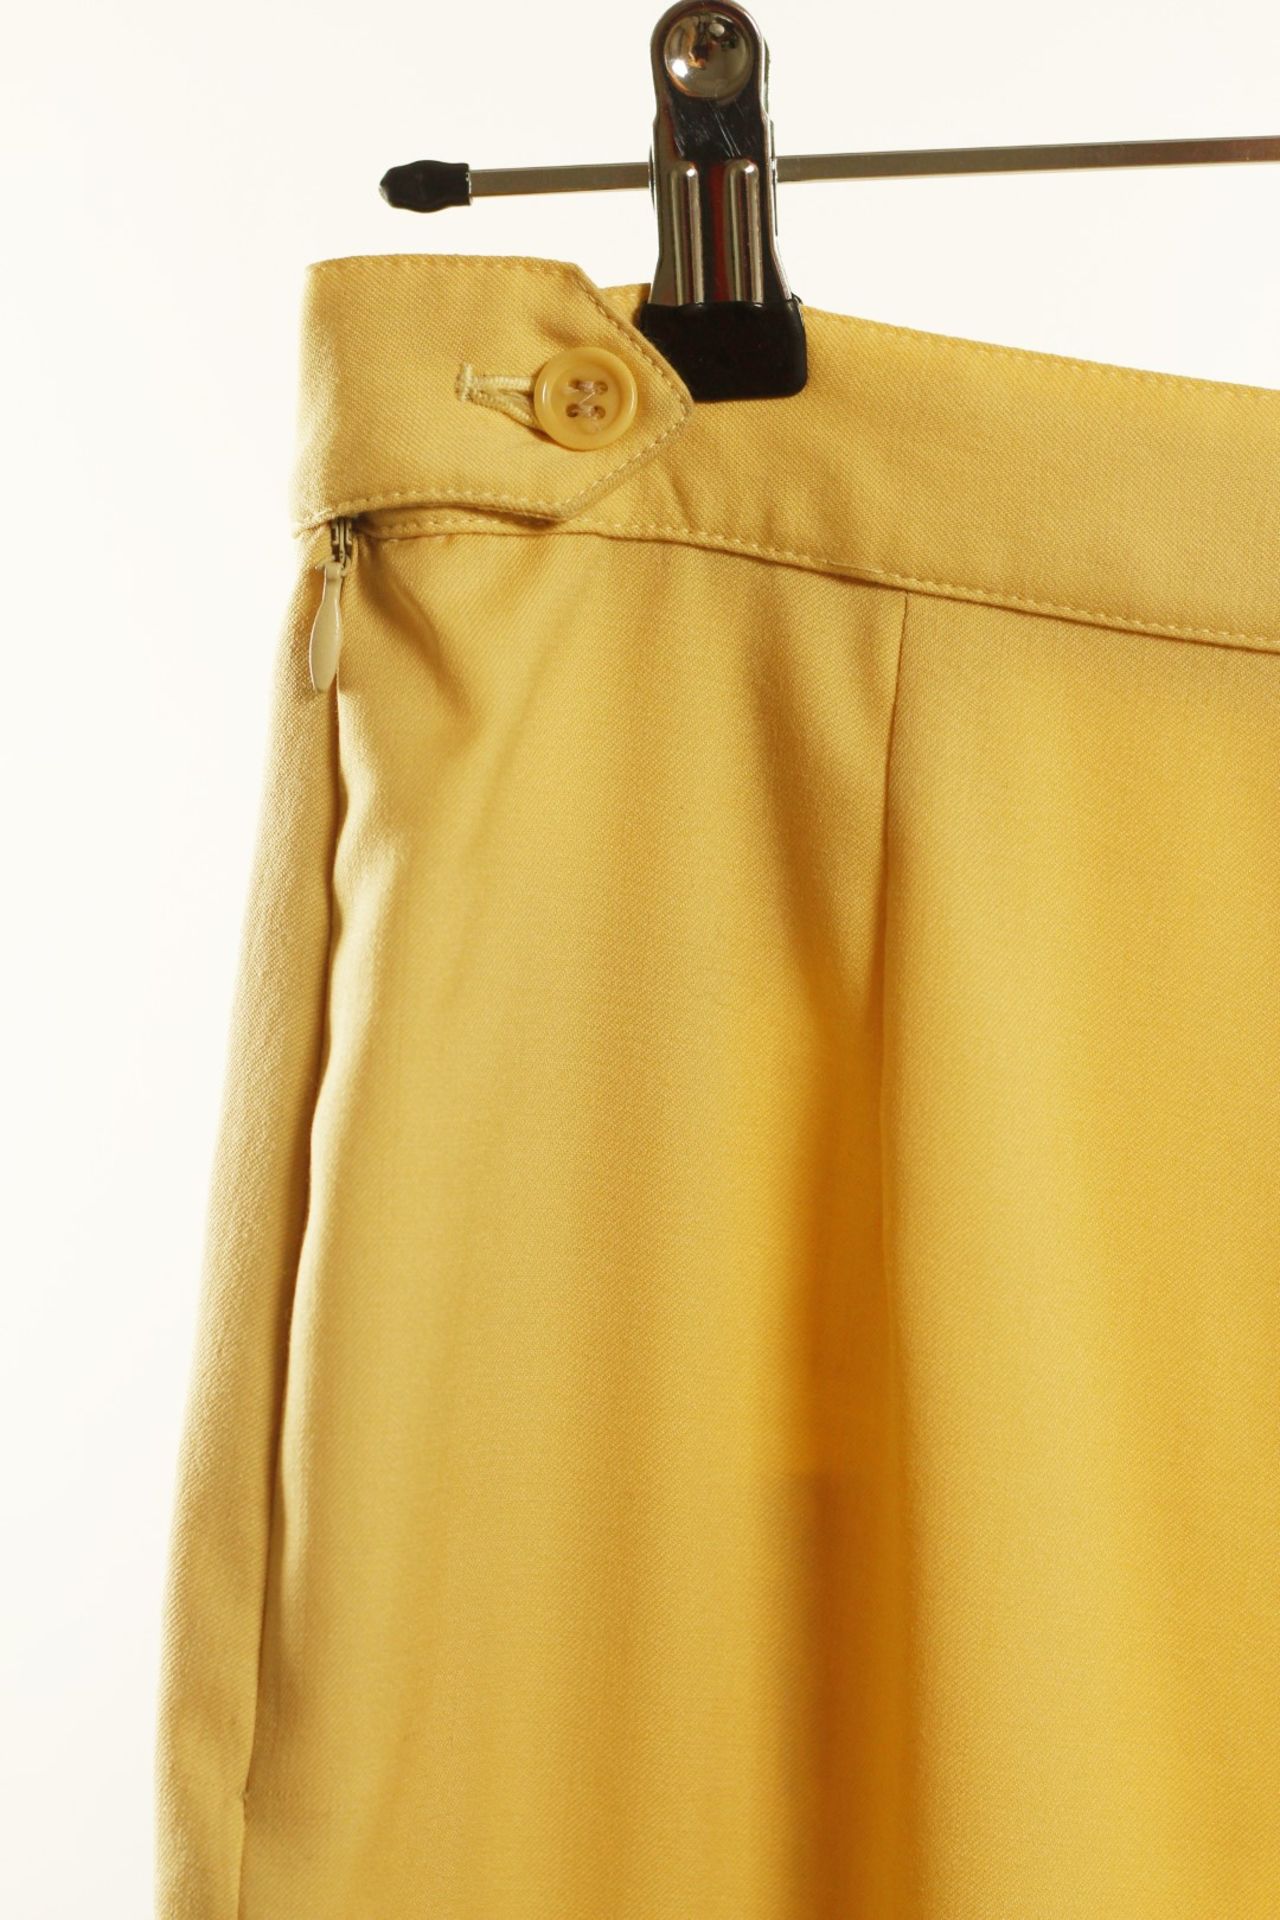 1 x Artico Cream Trousers - Size: 18 - Material: 100% Leather. Lining 50% viscose, 50% Acetate - - Image 6 of 9